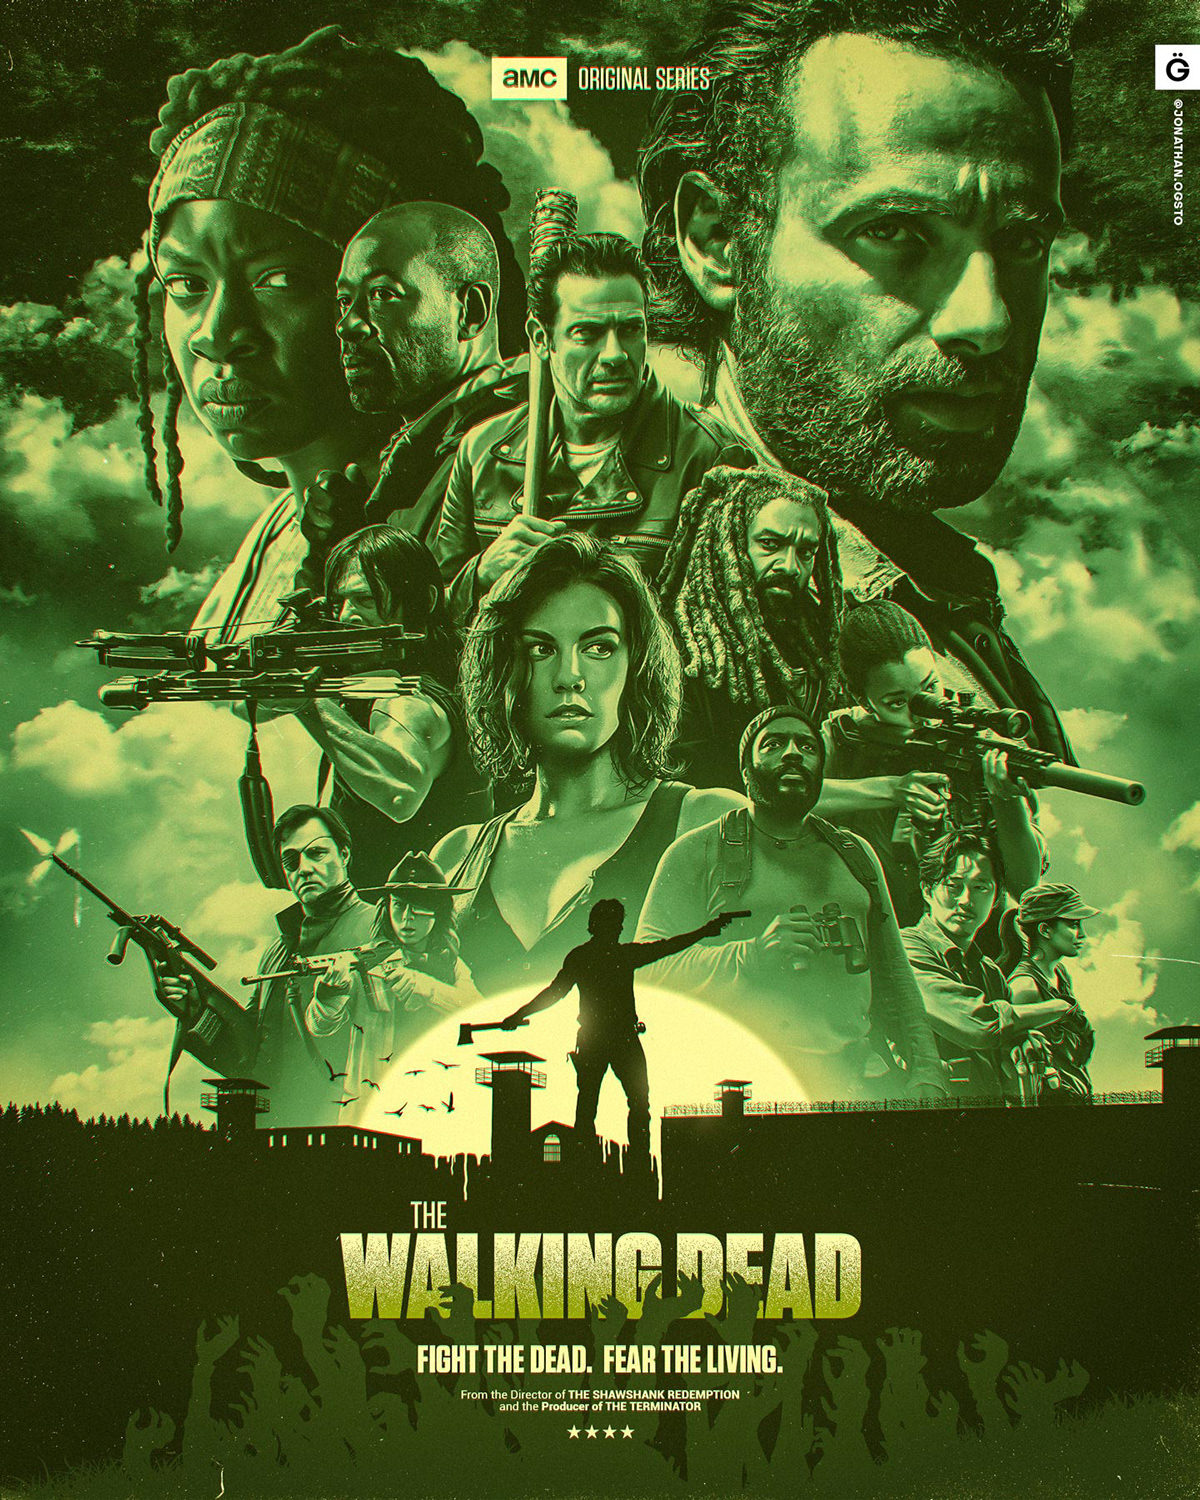 The Walking Dead poster. Type poster. Dead project